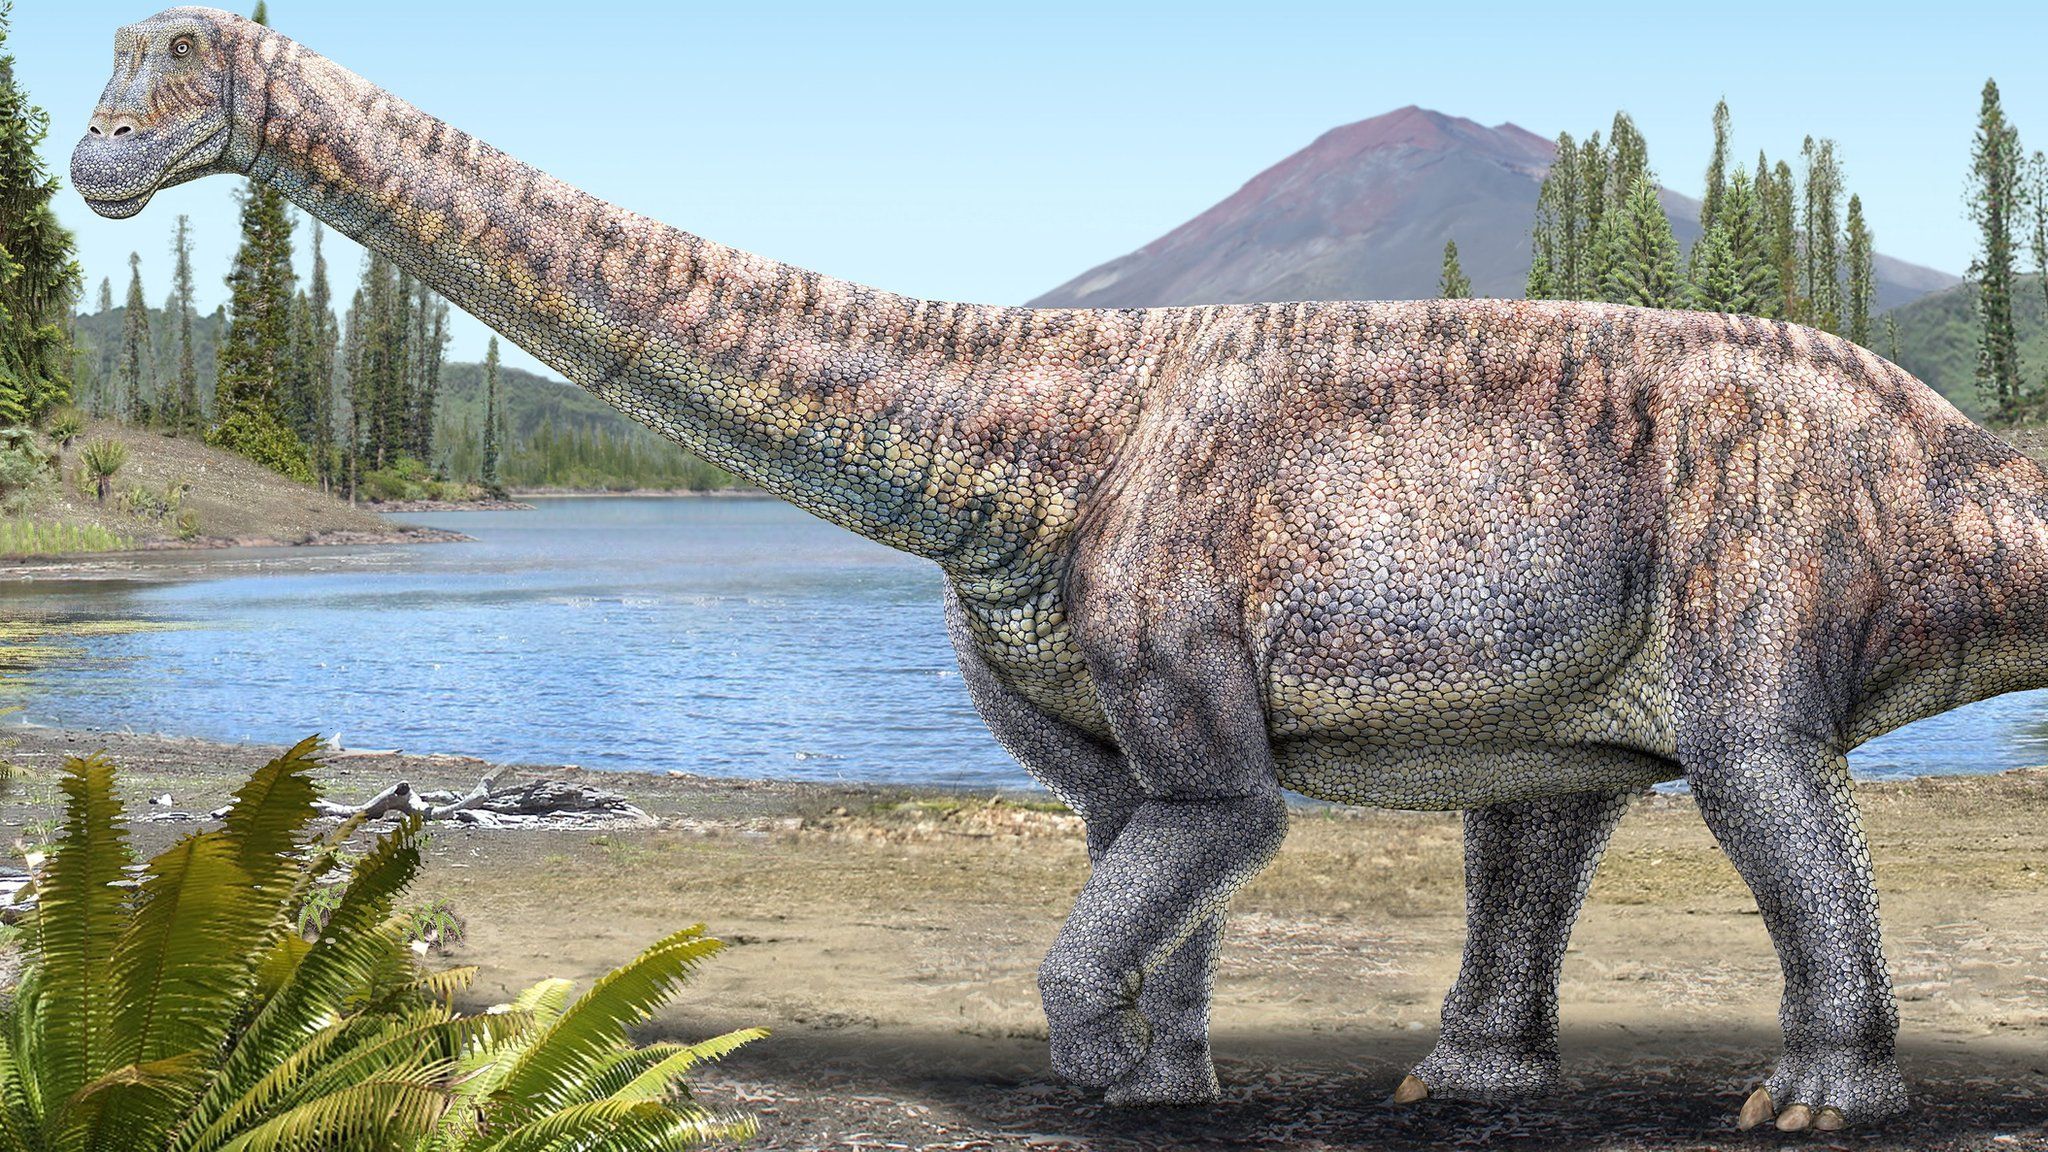 An artist's impression of a plant-eating dinosaur whose remains scientists discovered in the Atacama Desert in Chile